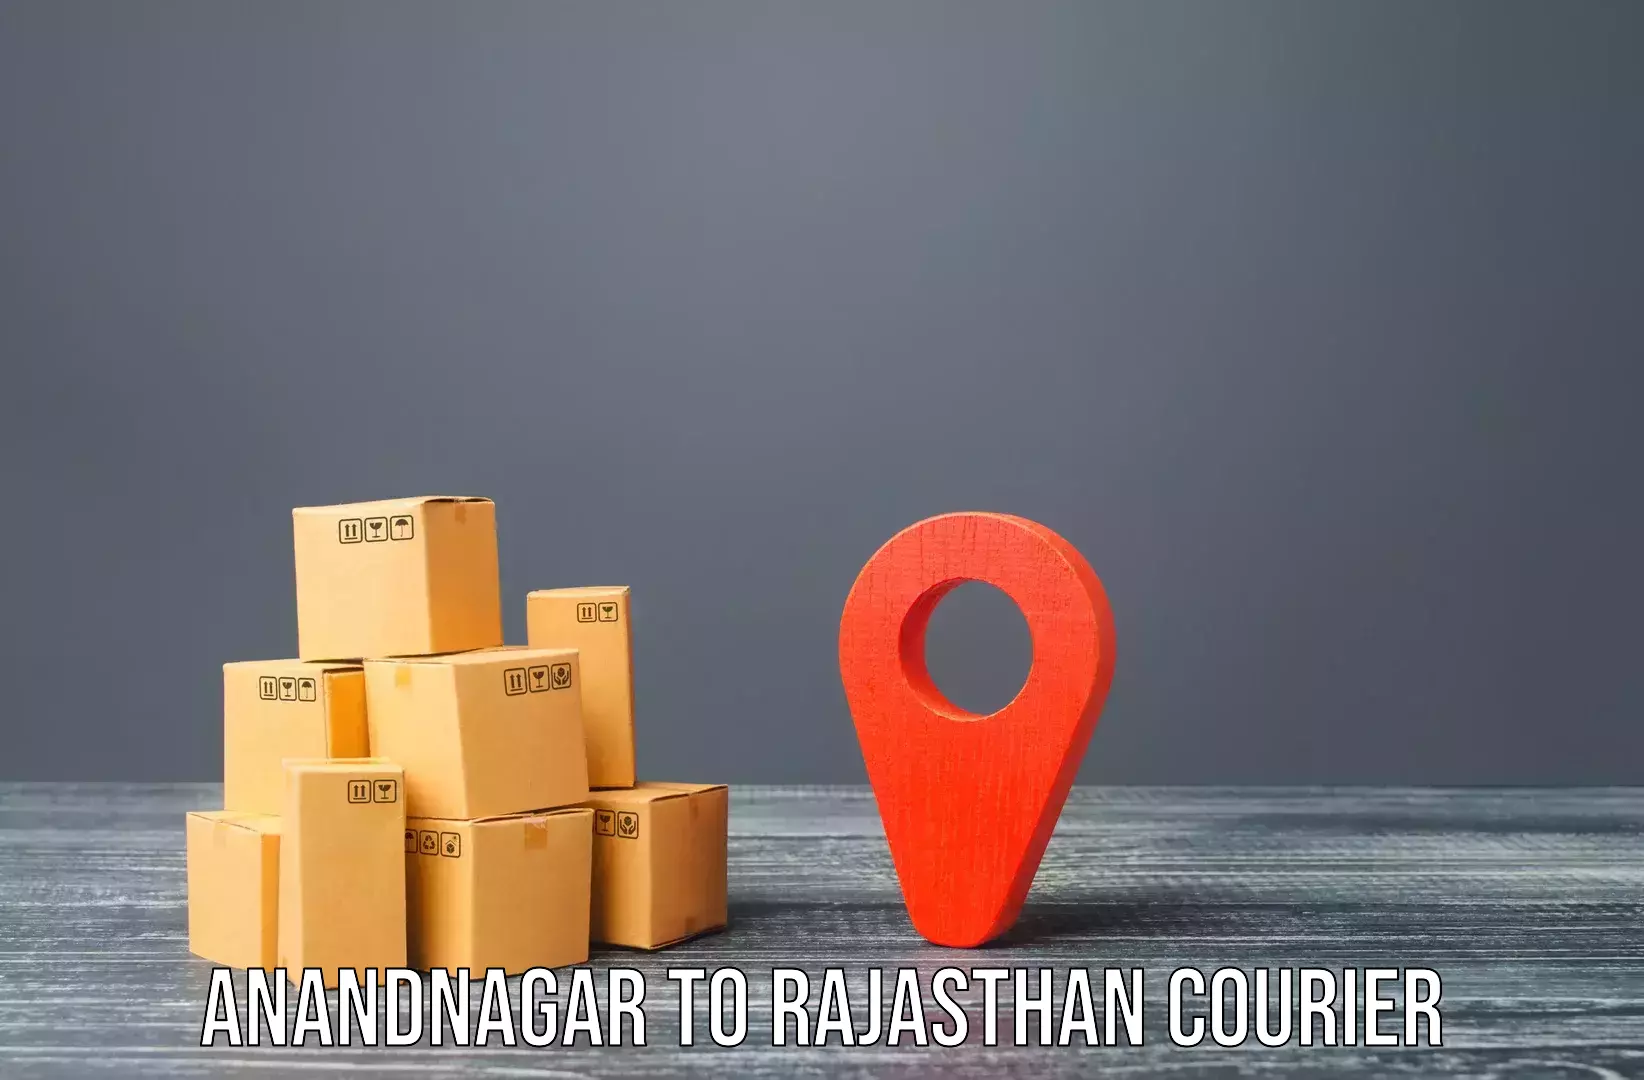 Home relocation and storage Anandnagar to Chhabra